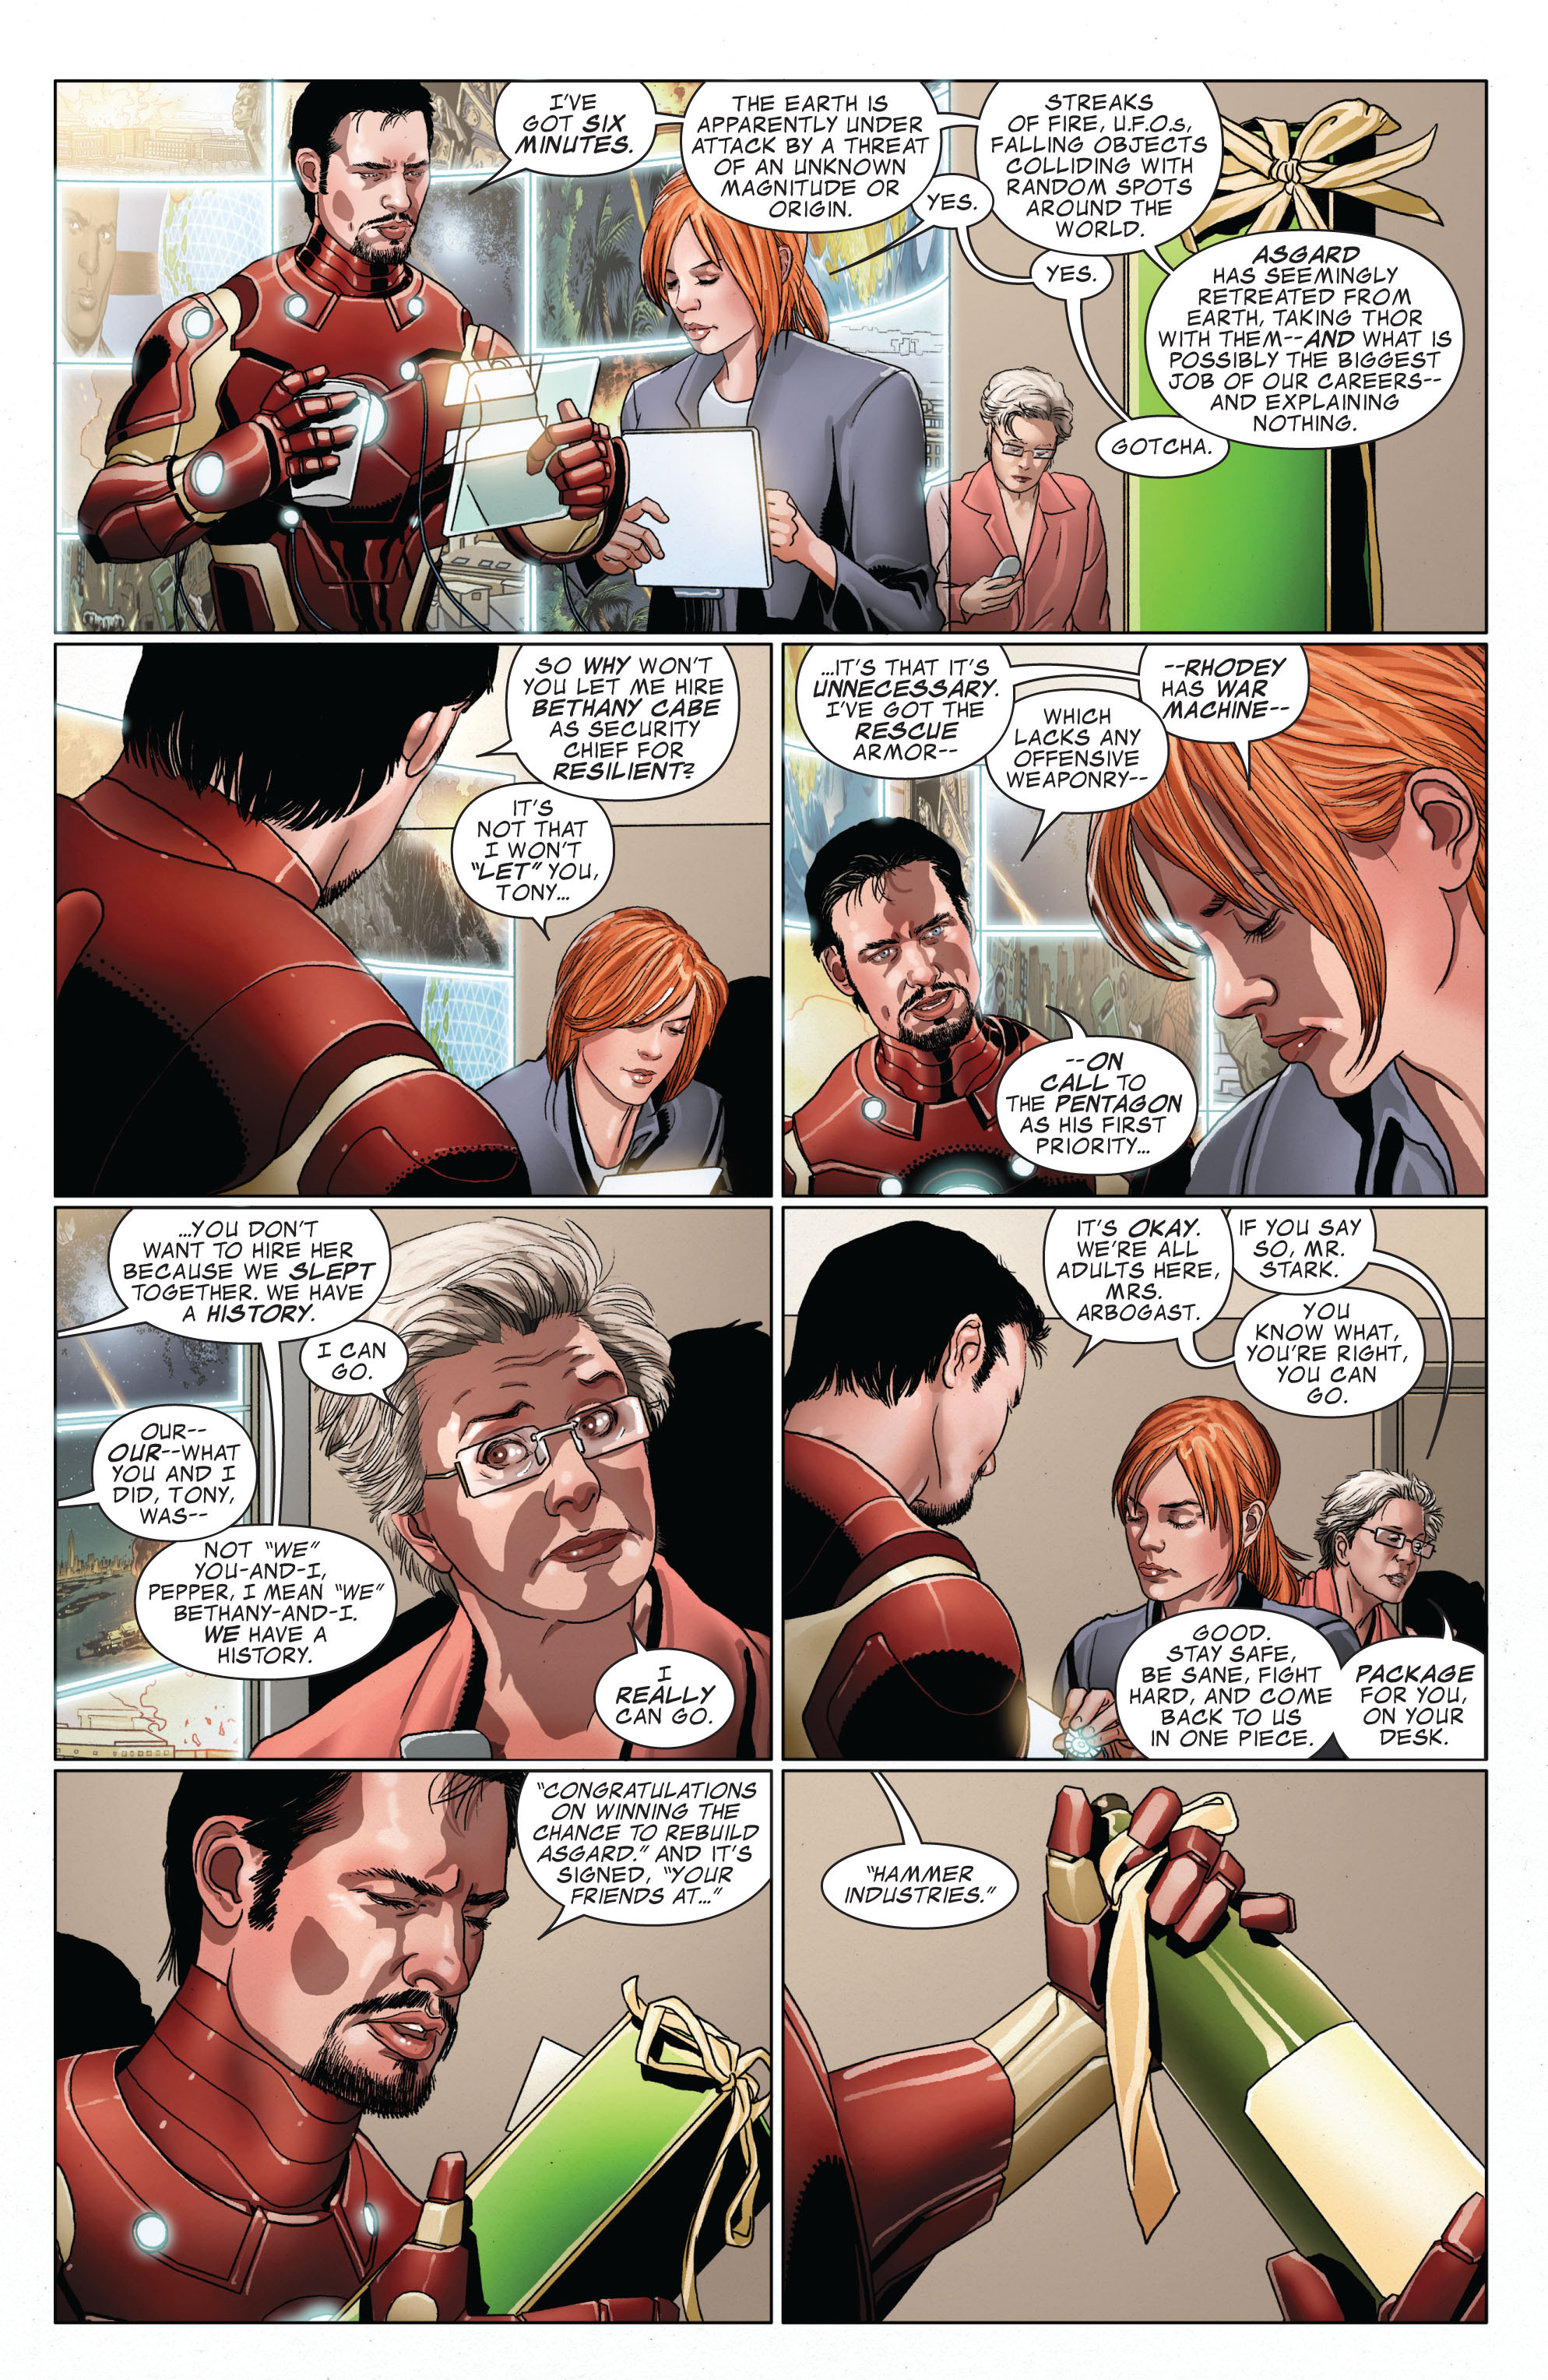 Invincible Iron Man (2008) 504 Page 4